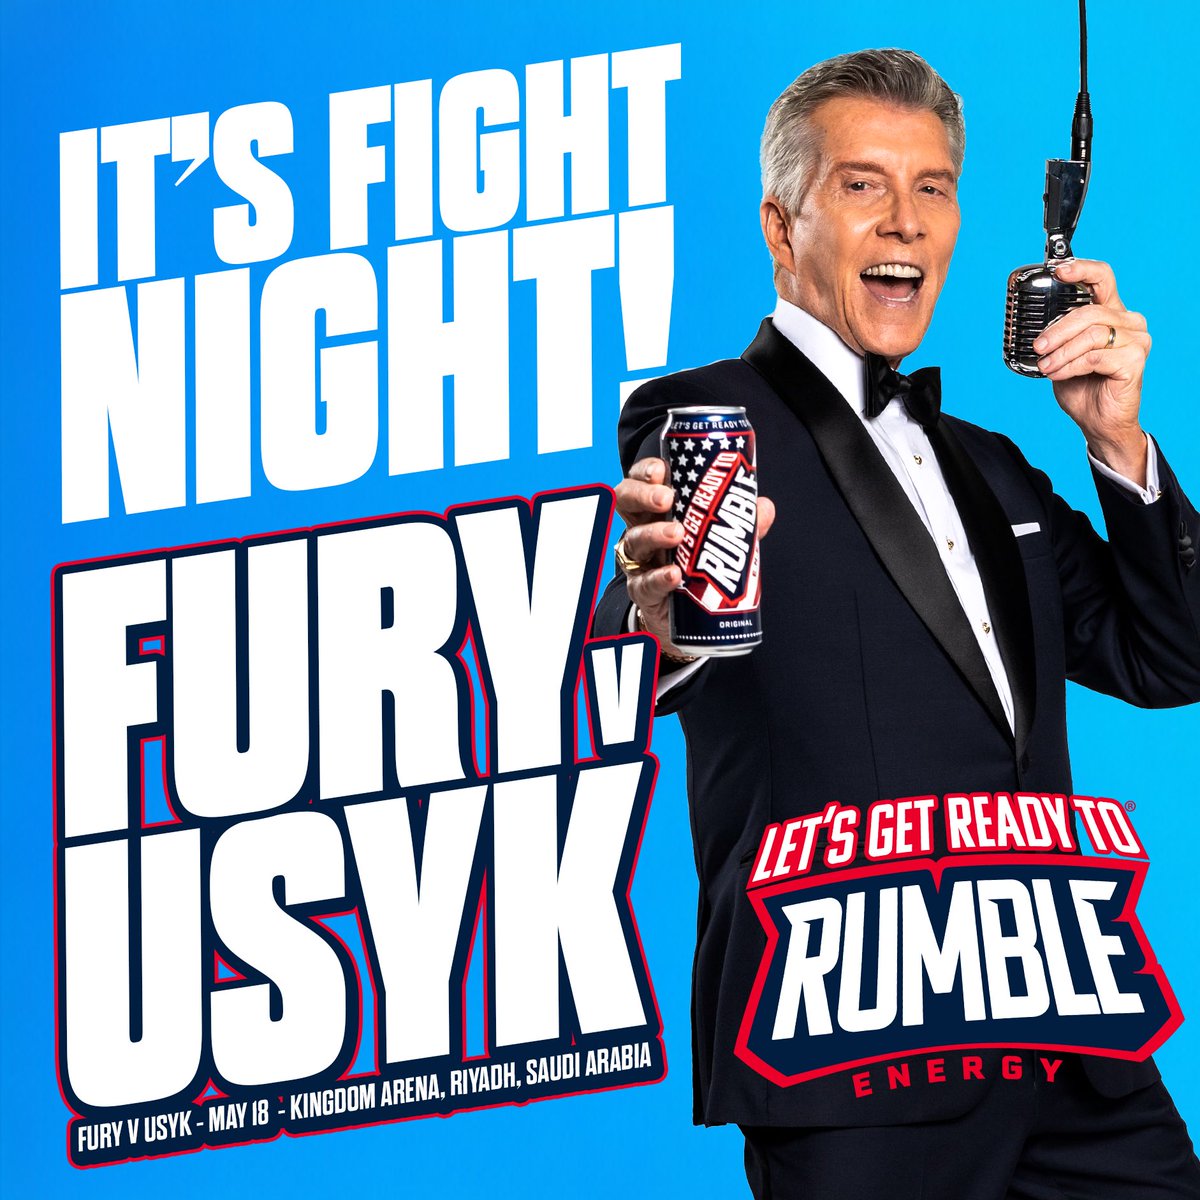 ONLY ONE WILL COME OUT UNDISPUTED 🔥

LET’S GET READY TO RUMBLE 🥊

@michael_buffer 🎙️

Who are you backing? Drop a vote below 👀

LGRTR available at @biglots 🔥

#furyvsusyk #fury #usyk #ringoffire #usykfury